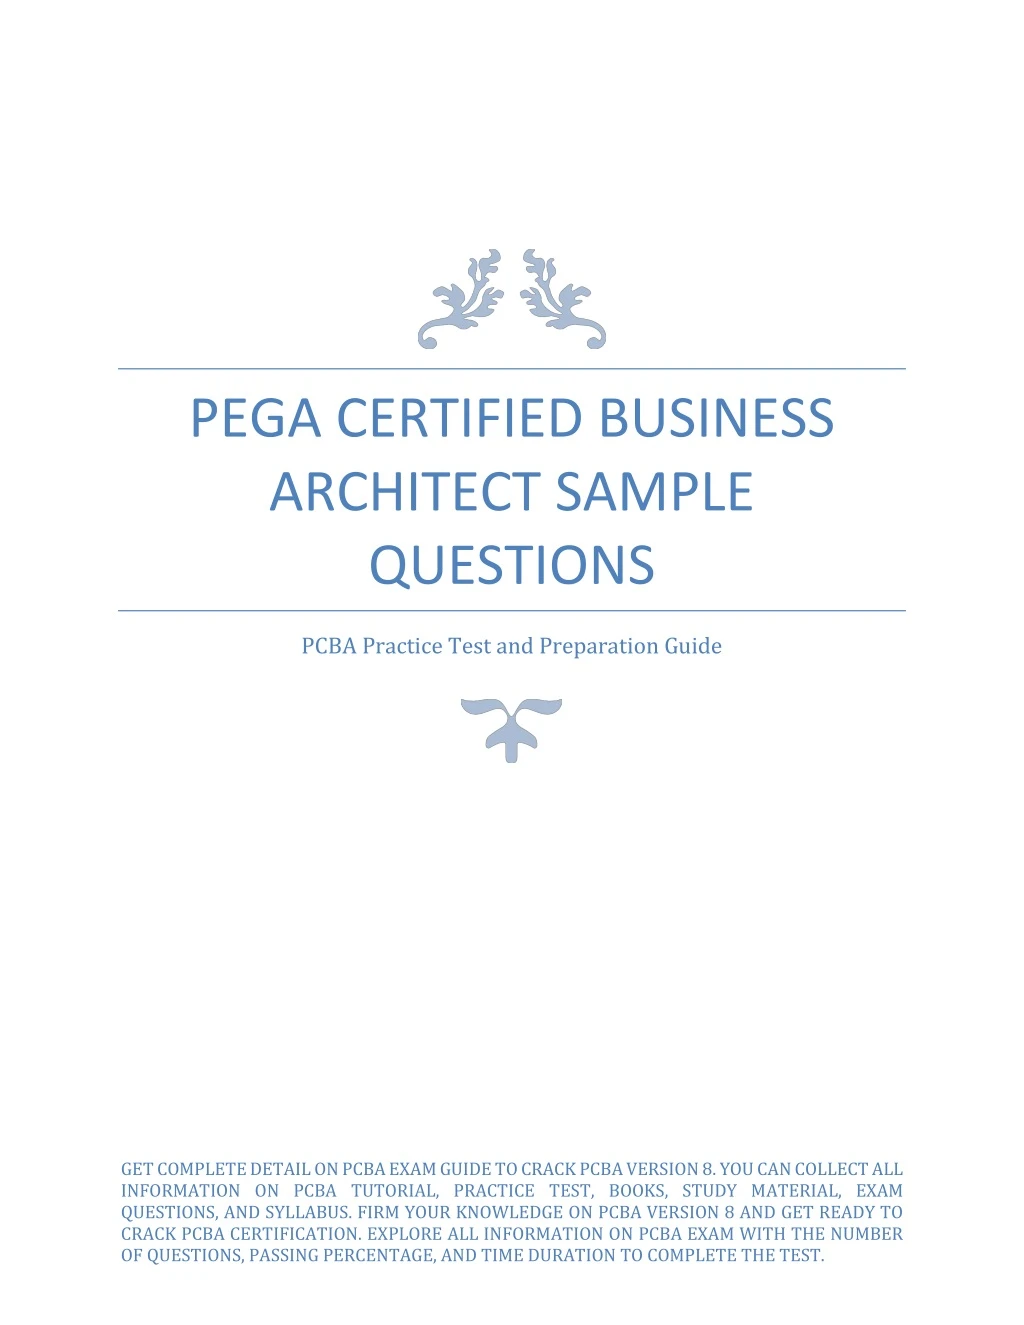 pega certified business architect sample questions